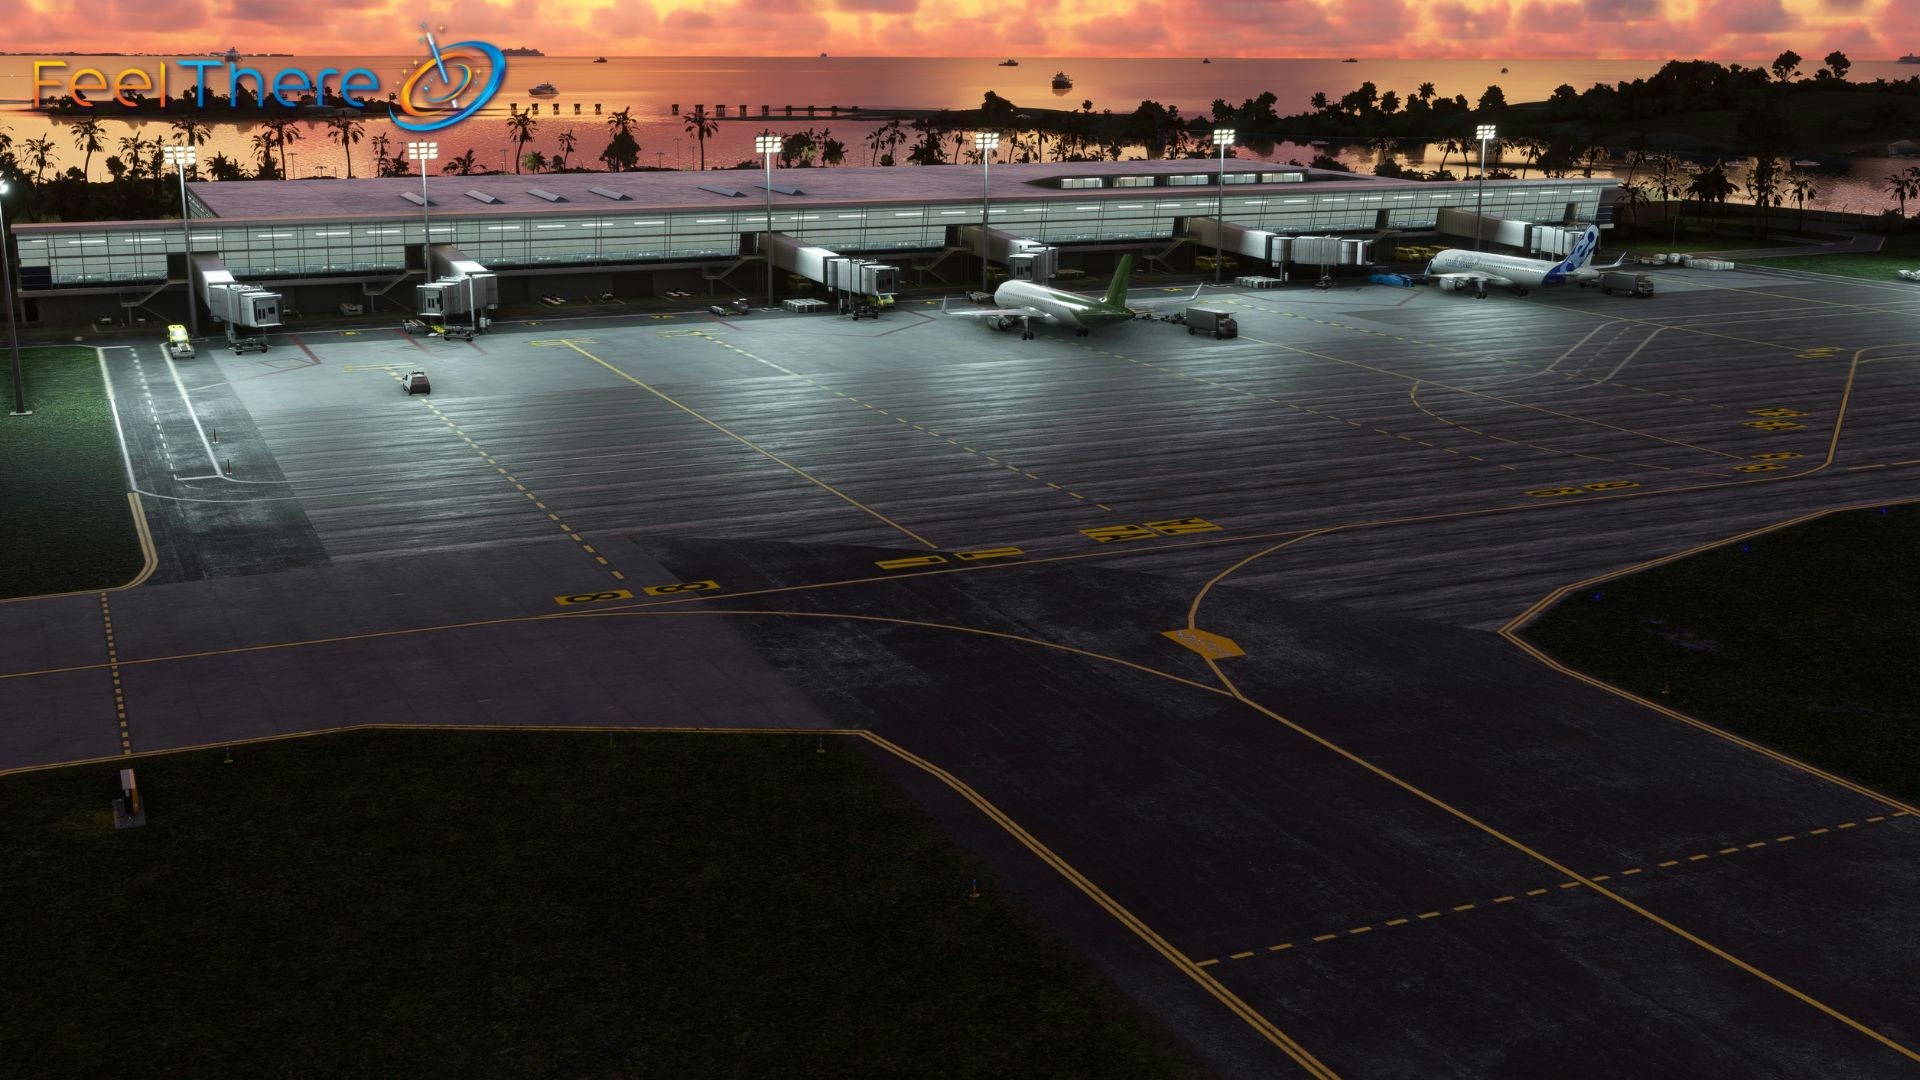 FeelThere Releases Bermuda International Airport